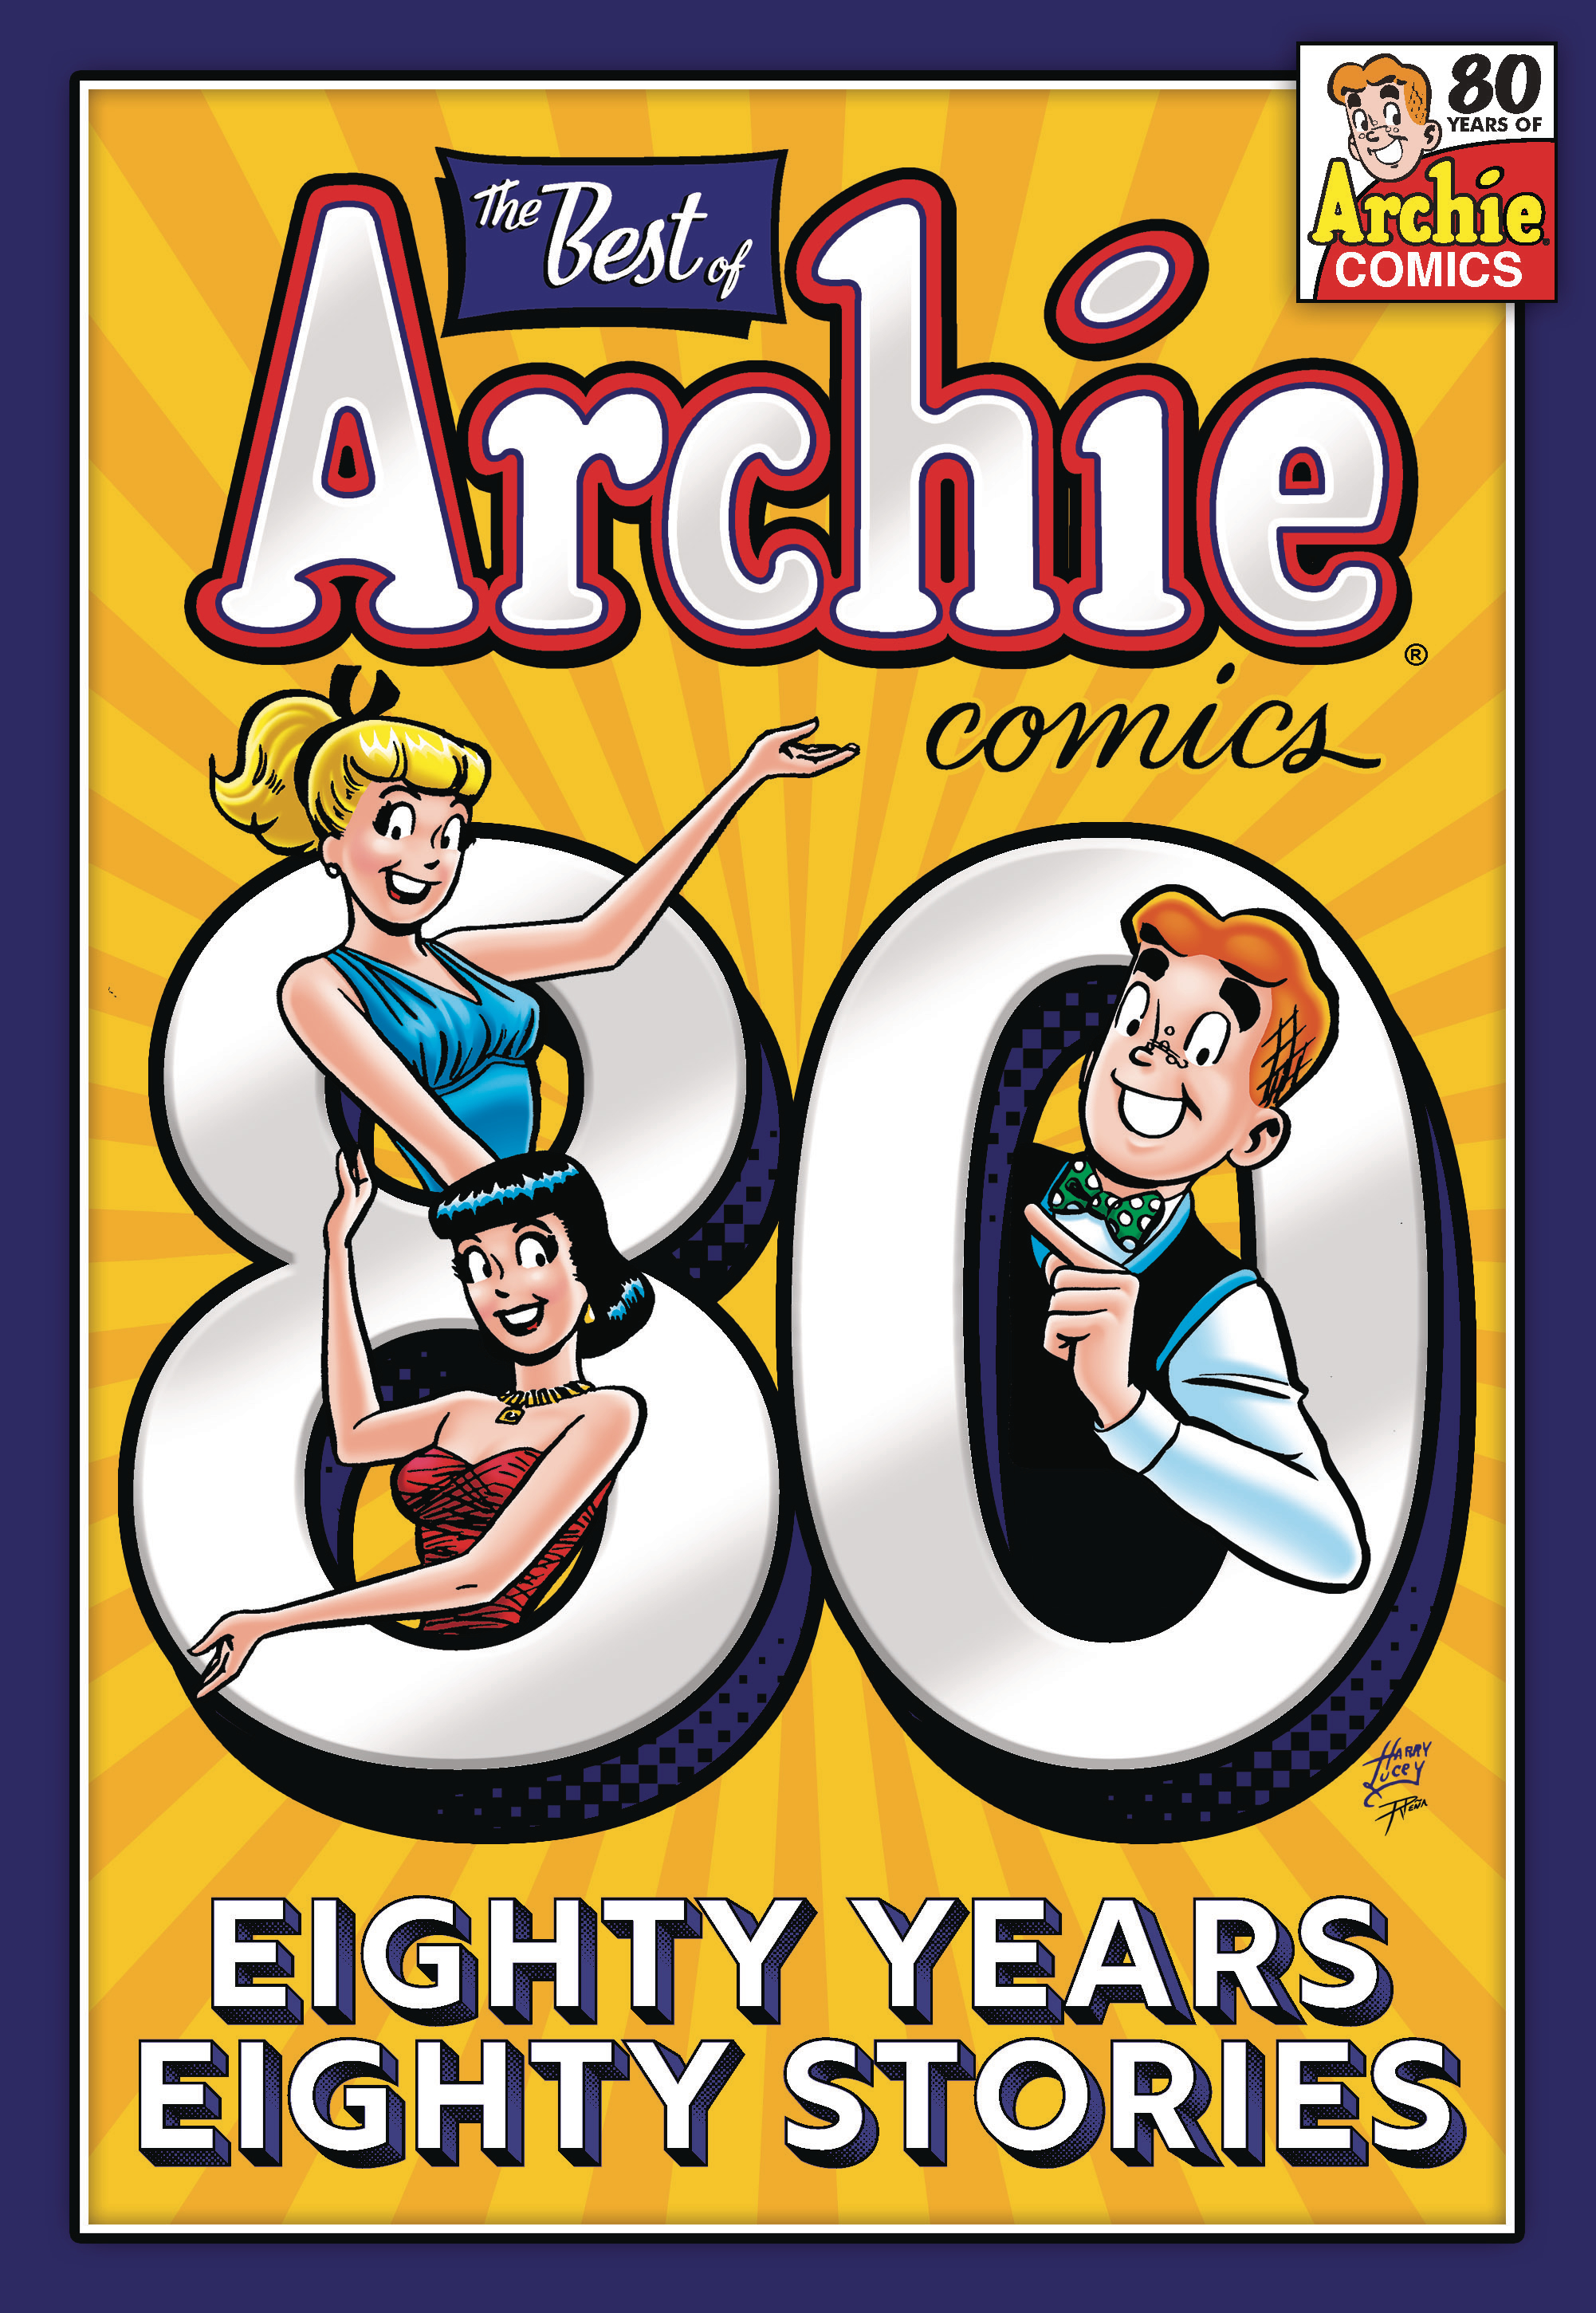 Best of Archie Comics 80 Years 80 Stories Graphic Novel